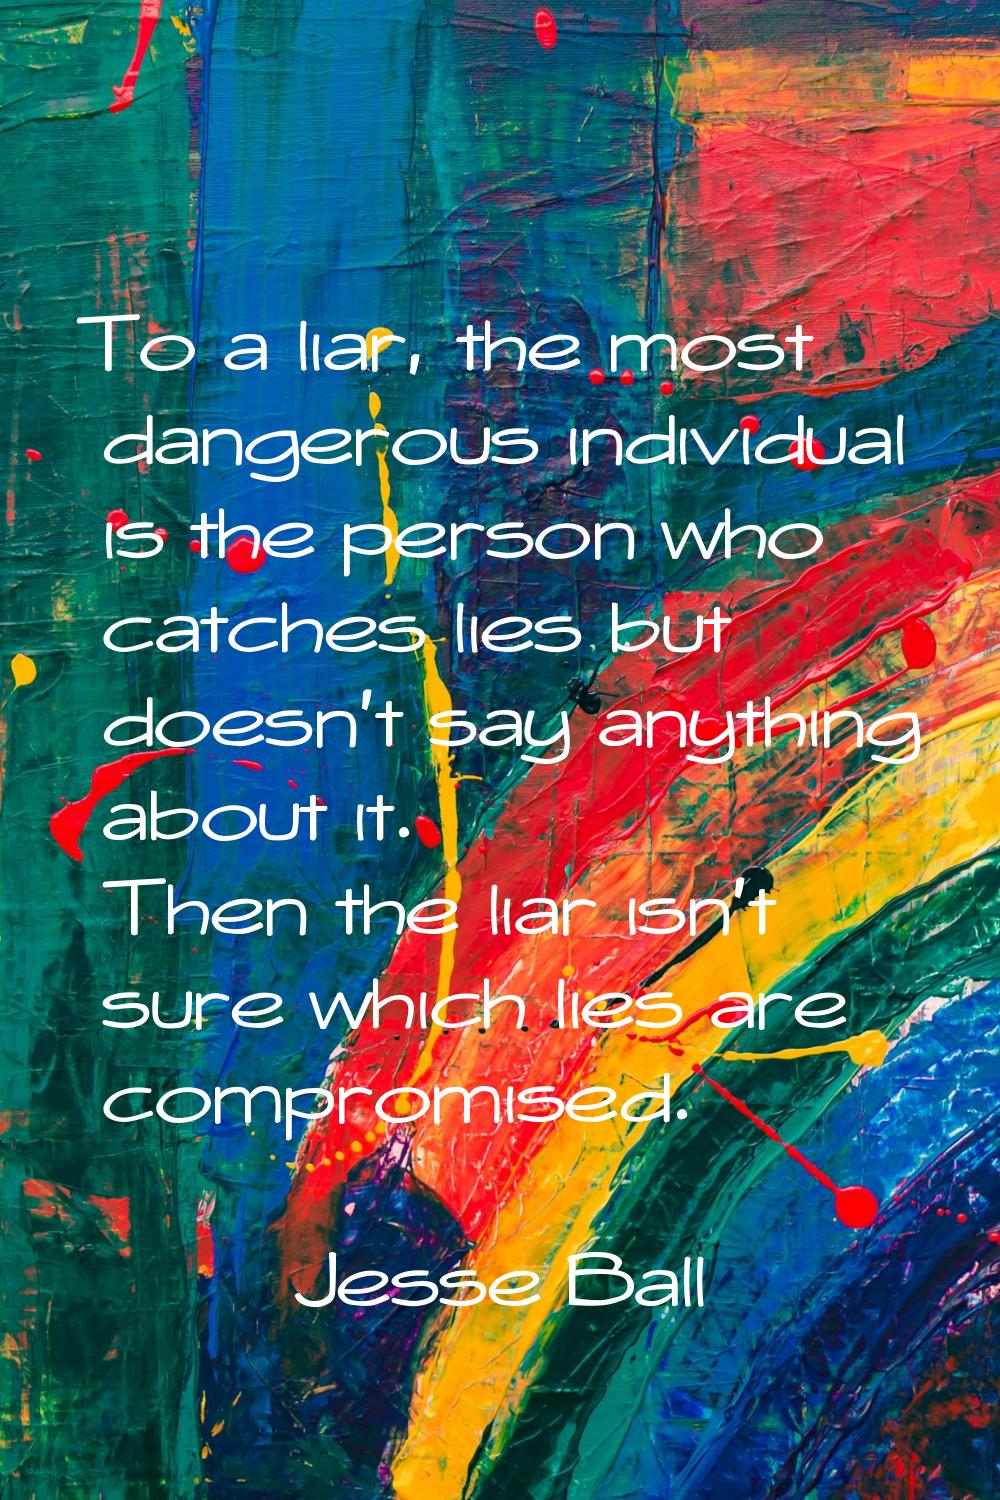 To a liar, the most dangerous individual is the person who catches lies but doesn't say anything ab